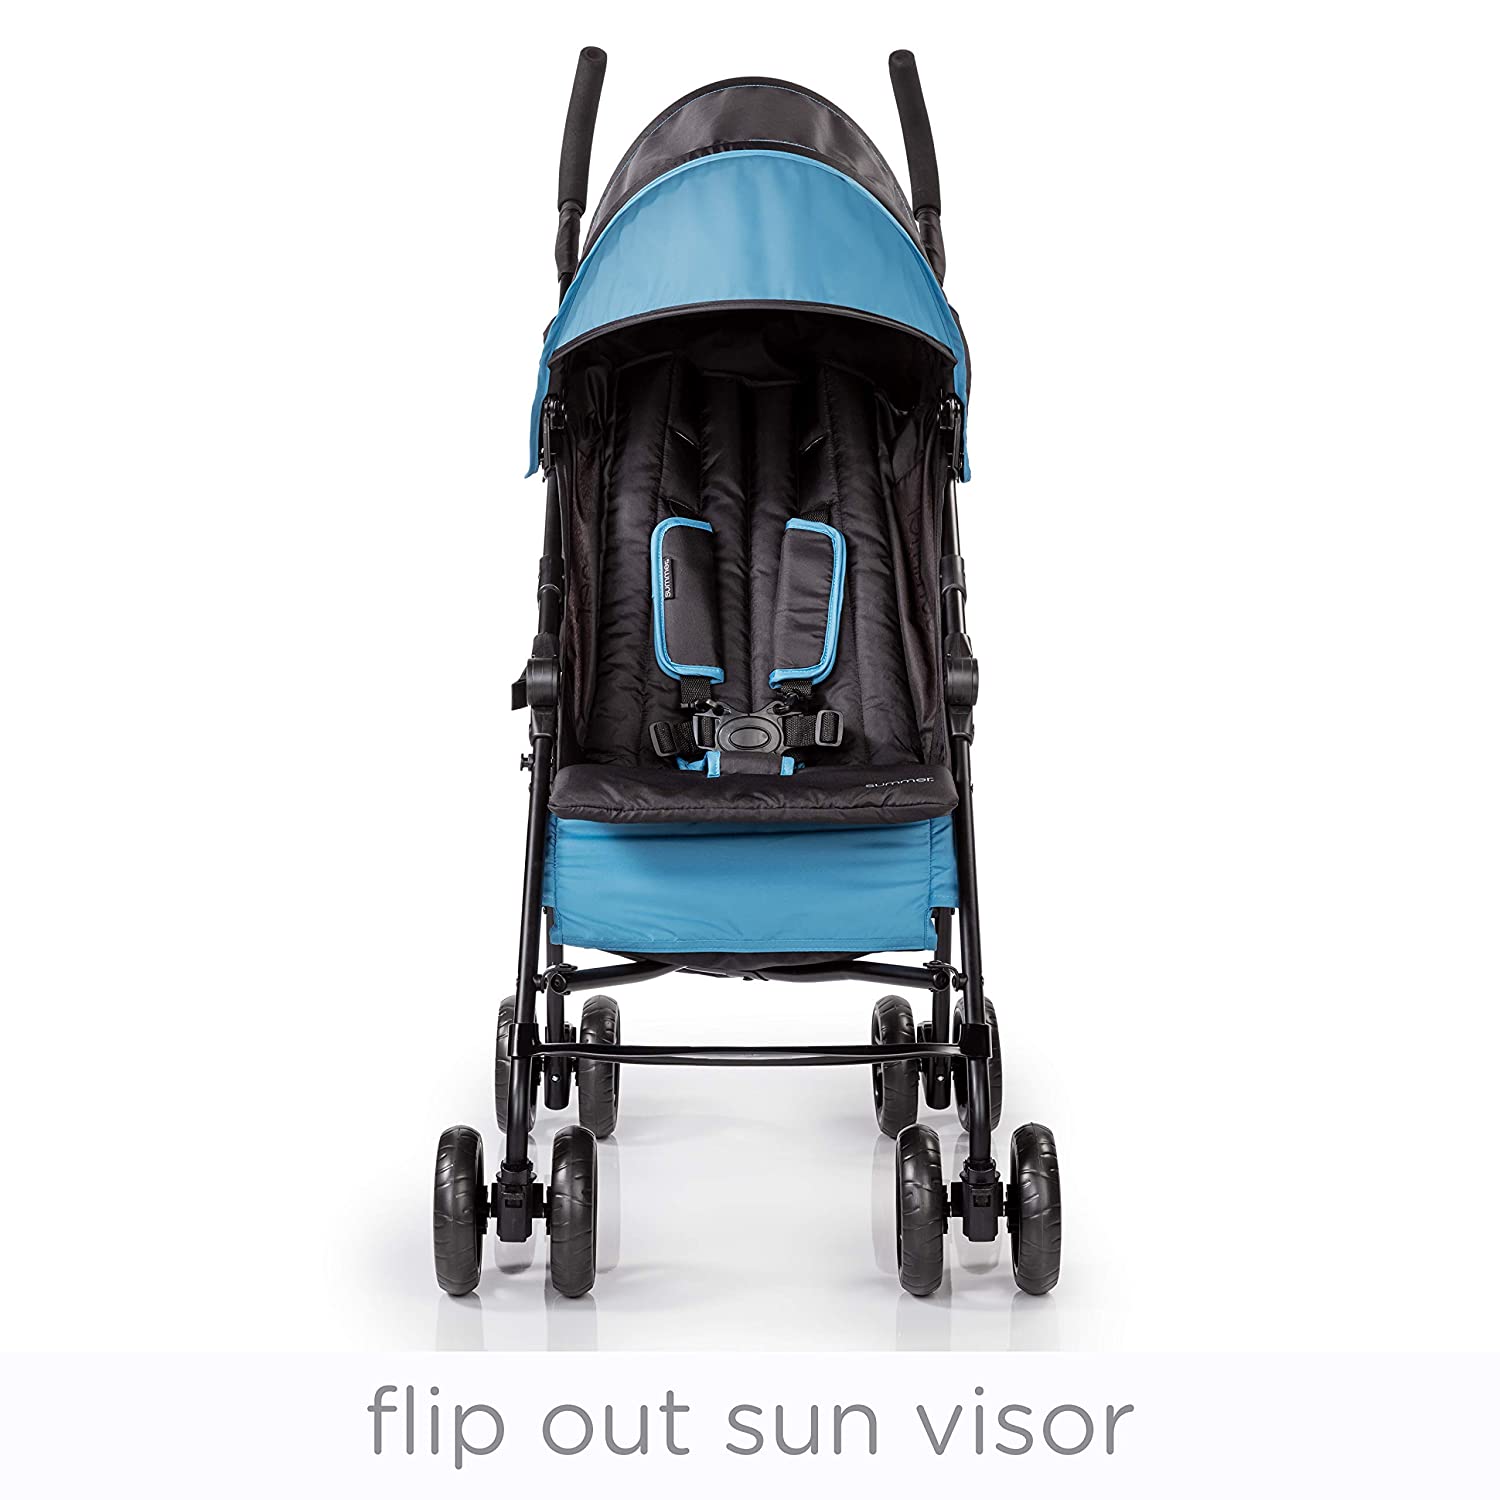 Summer Infant 3Dmini Convenience Lightweight Foldable Travel Baby Stroller, Blue - image 4 of 6